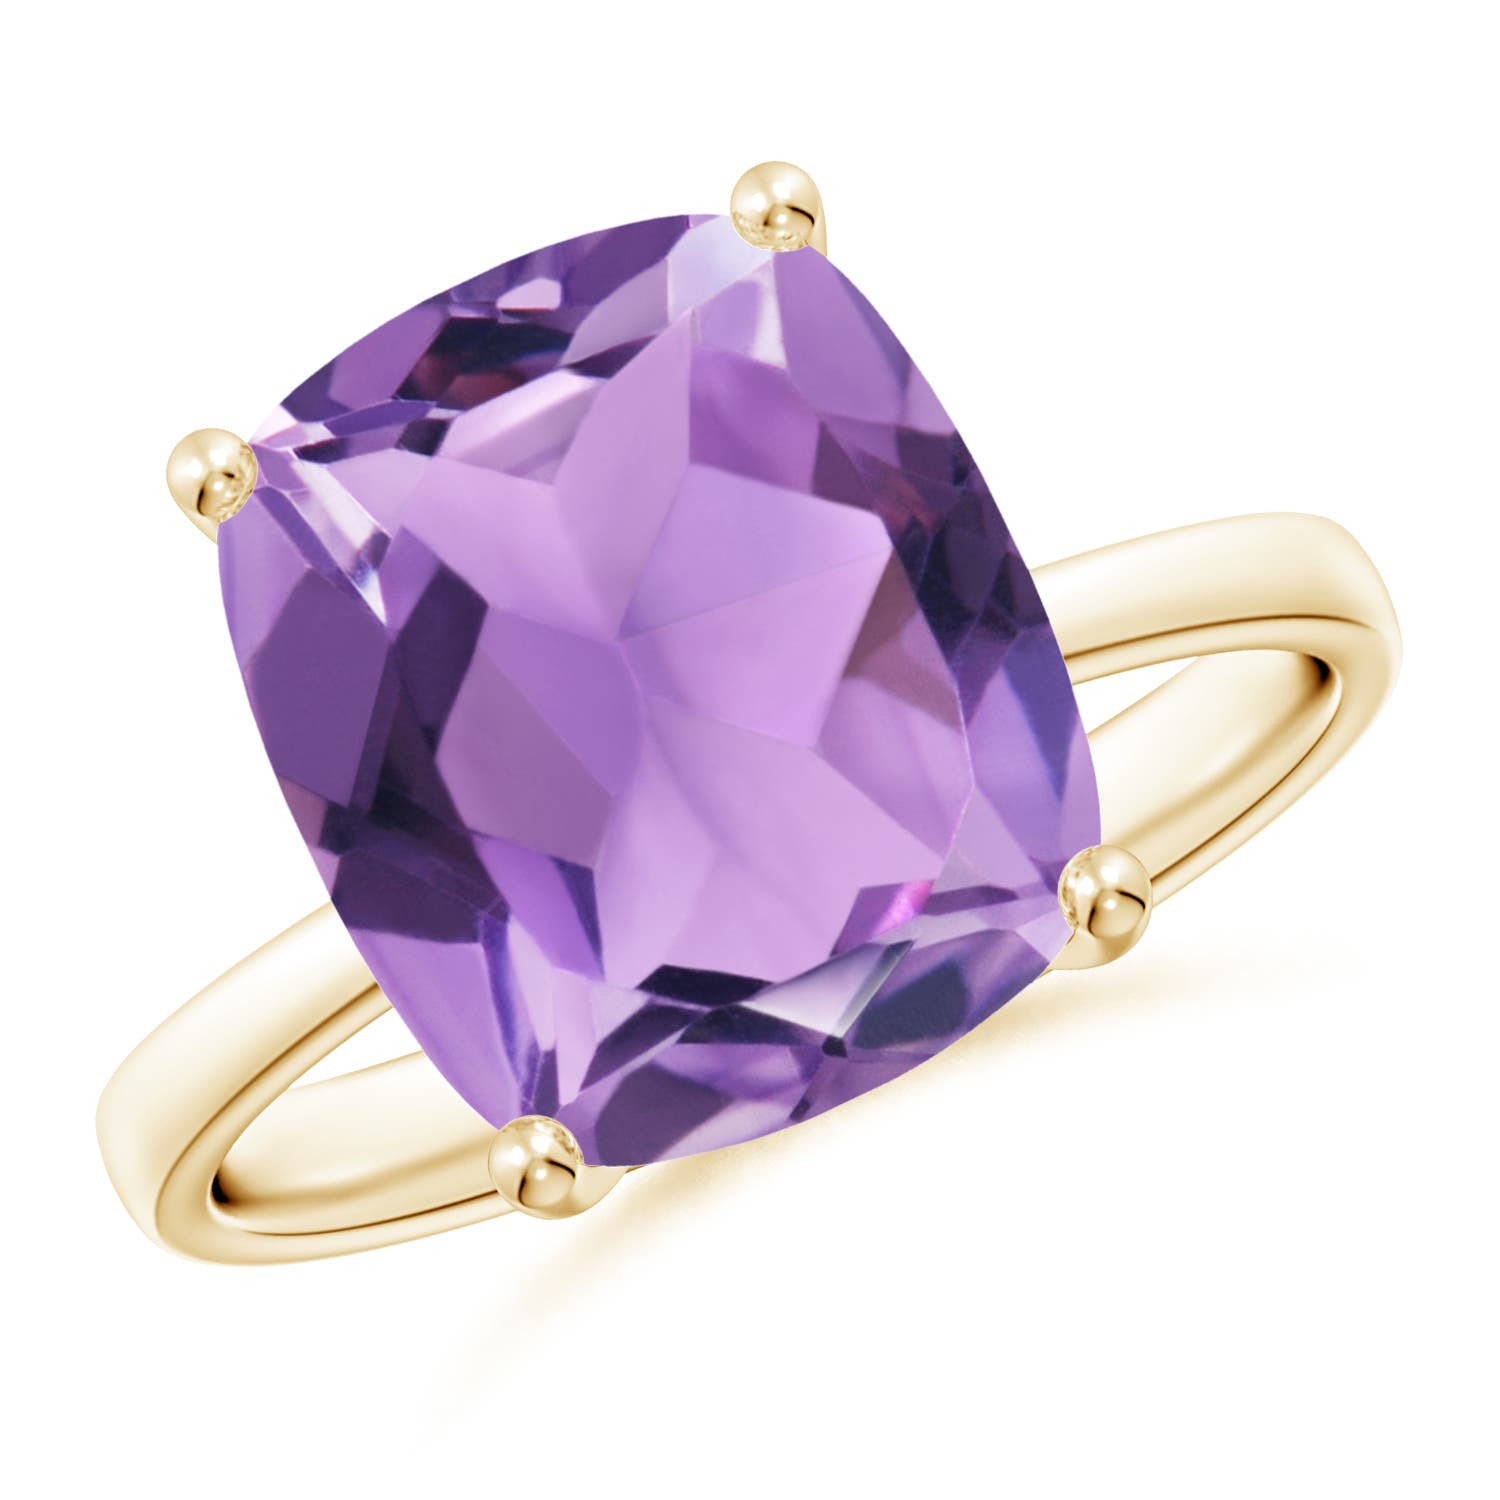 A - Amethyst / 4.6 CT / 14 KT Yellow Gold